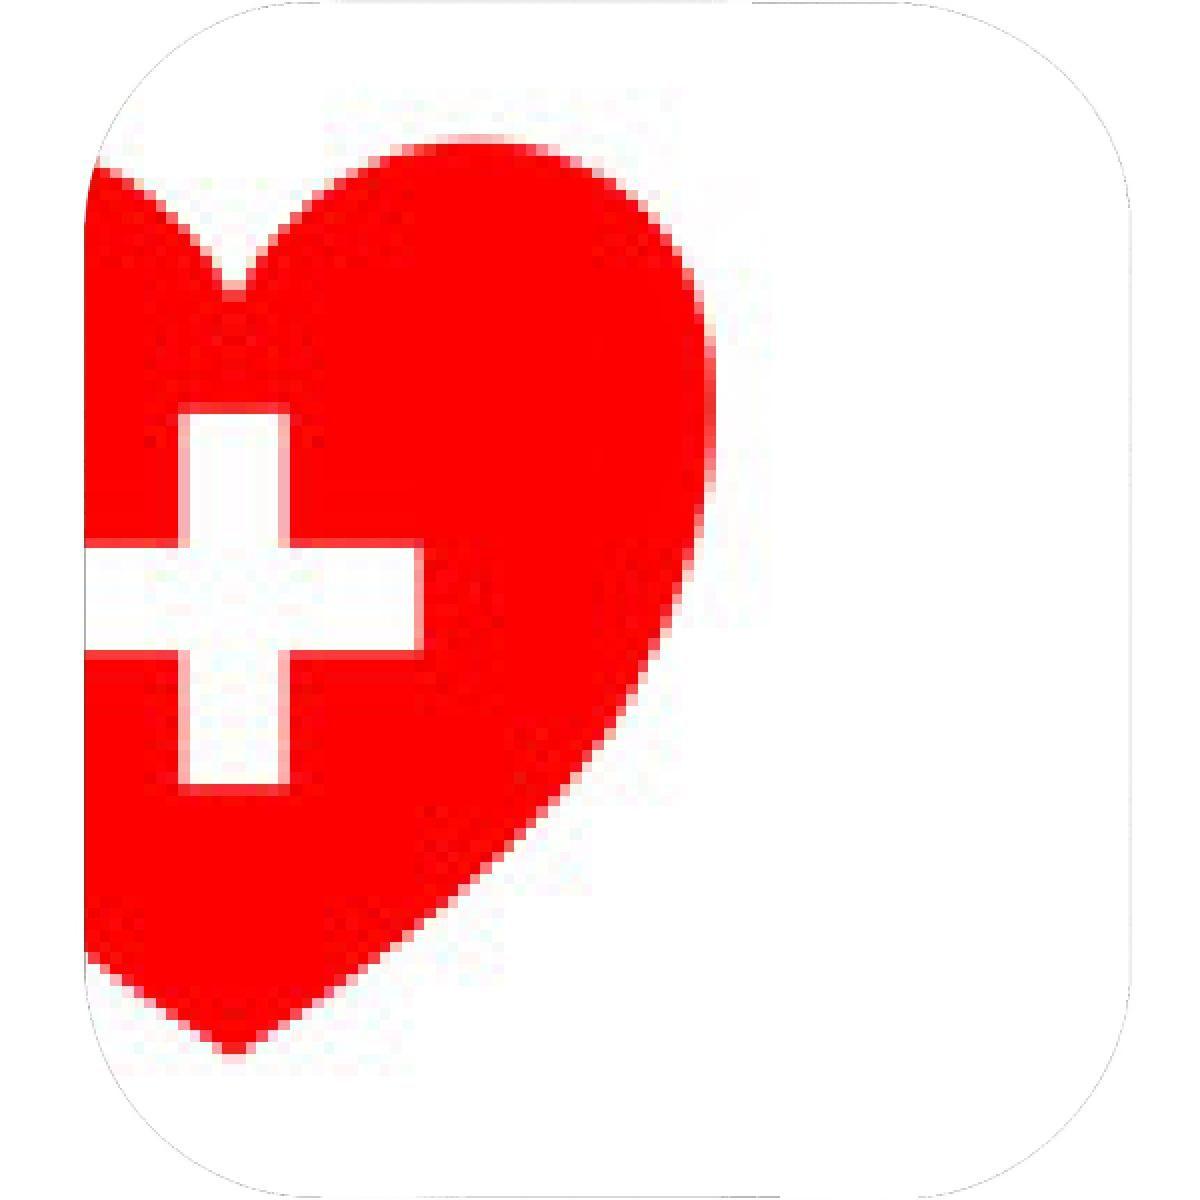 Red Heart with White Cross Logo - Designs – Mein Mousepad Design – Mousepad selbst designen